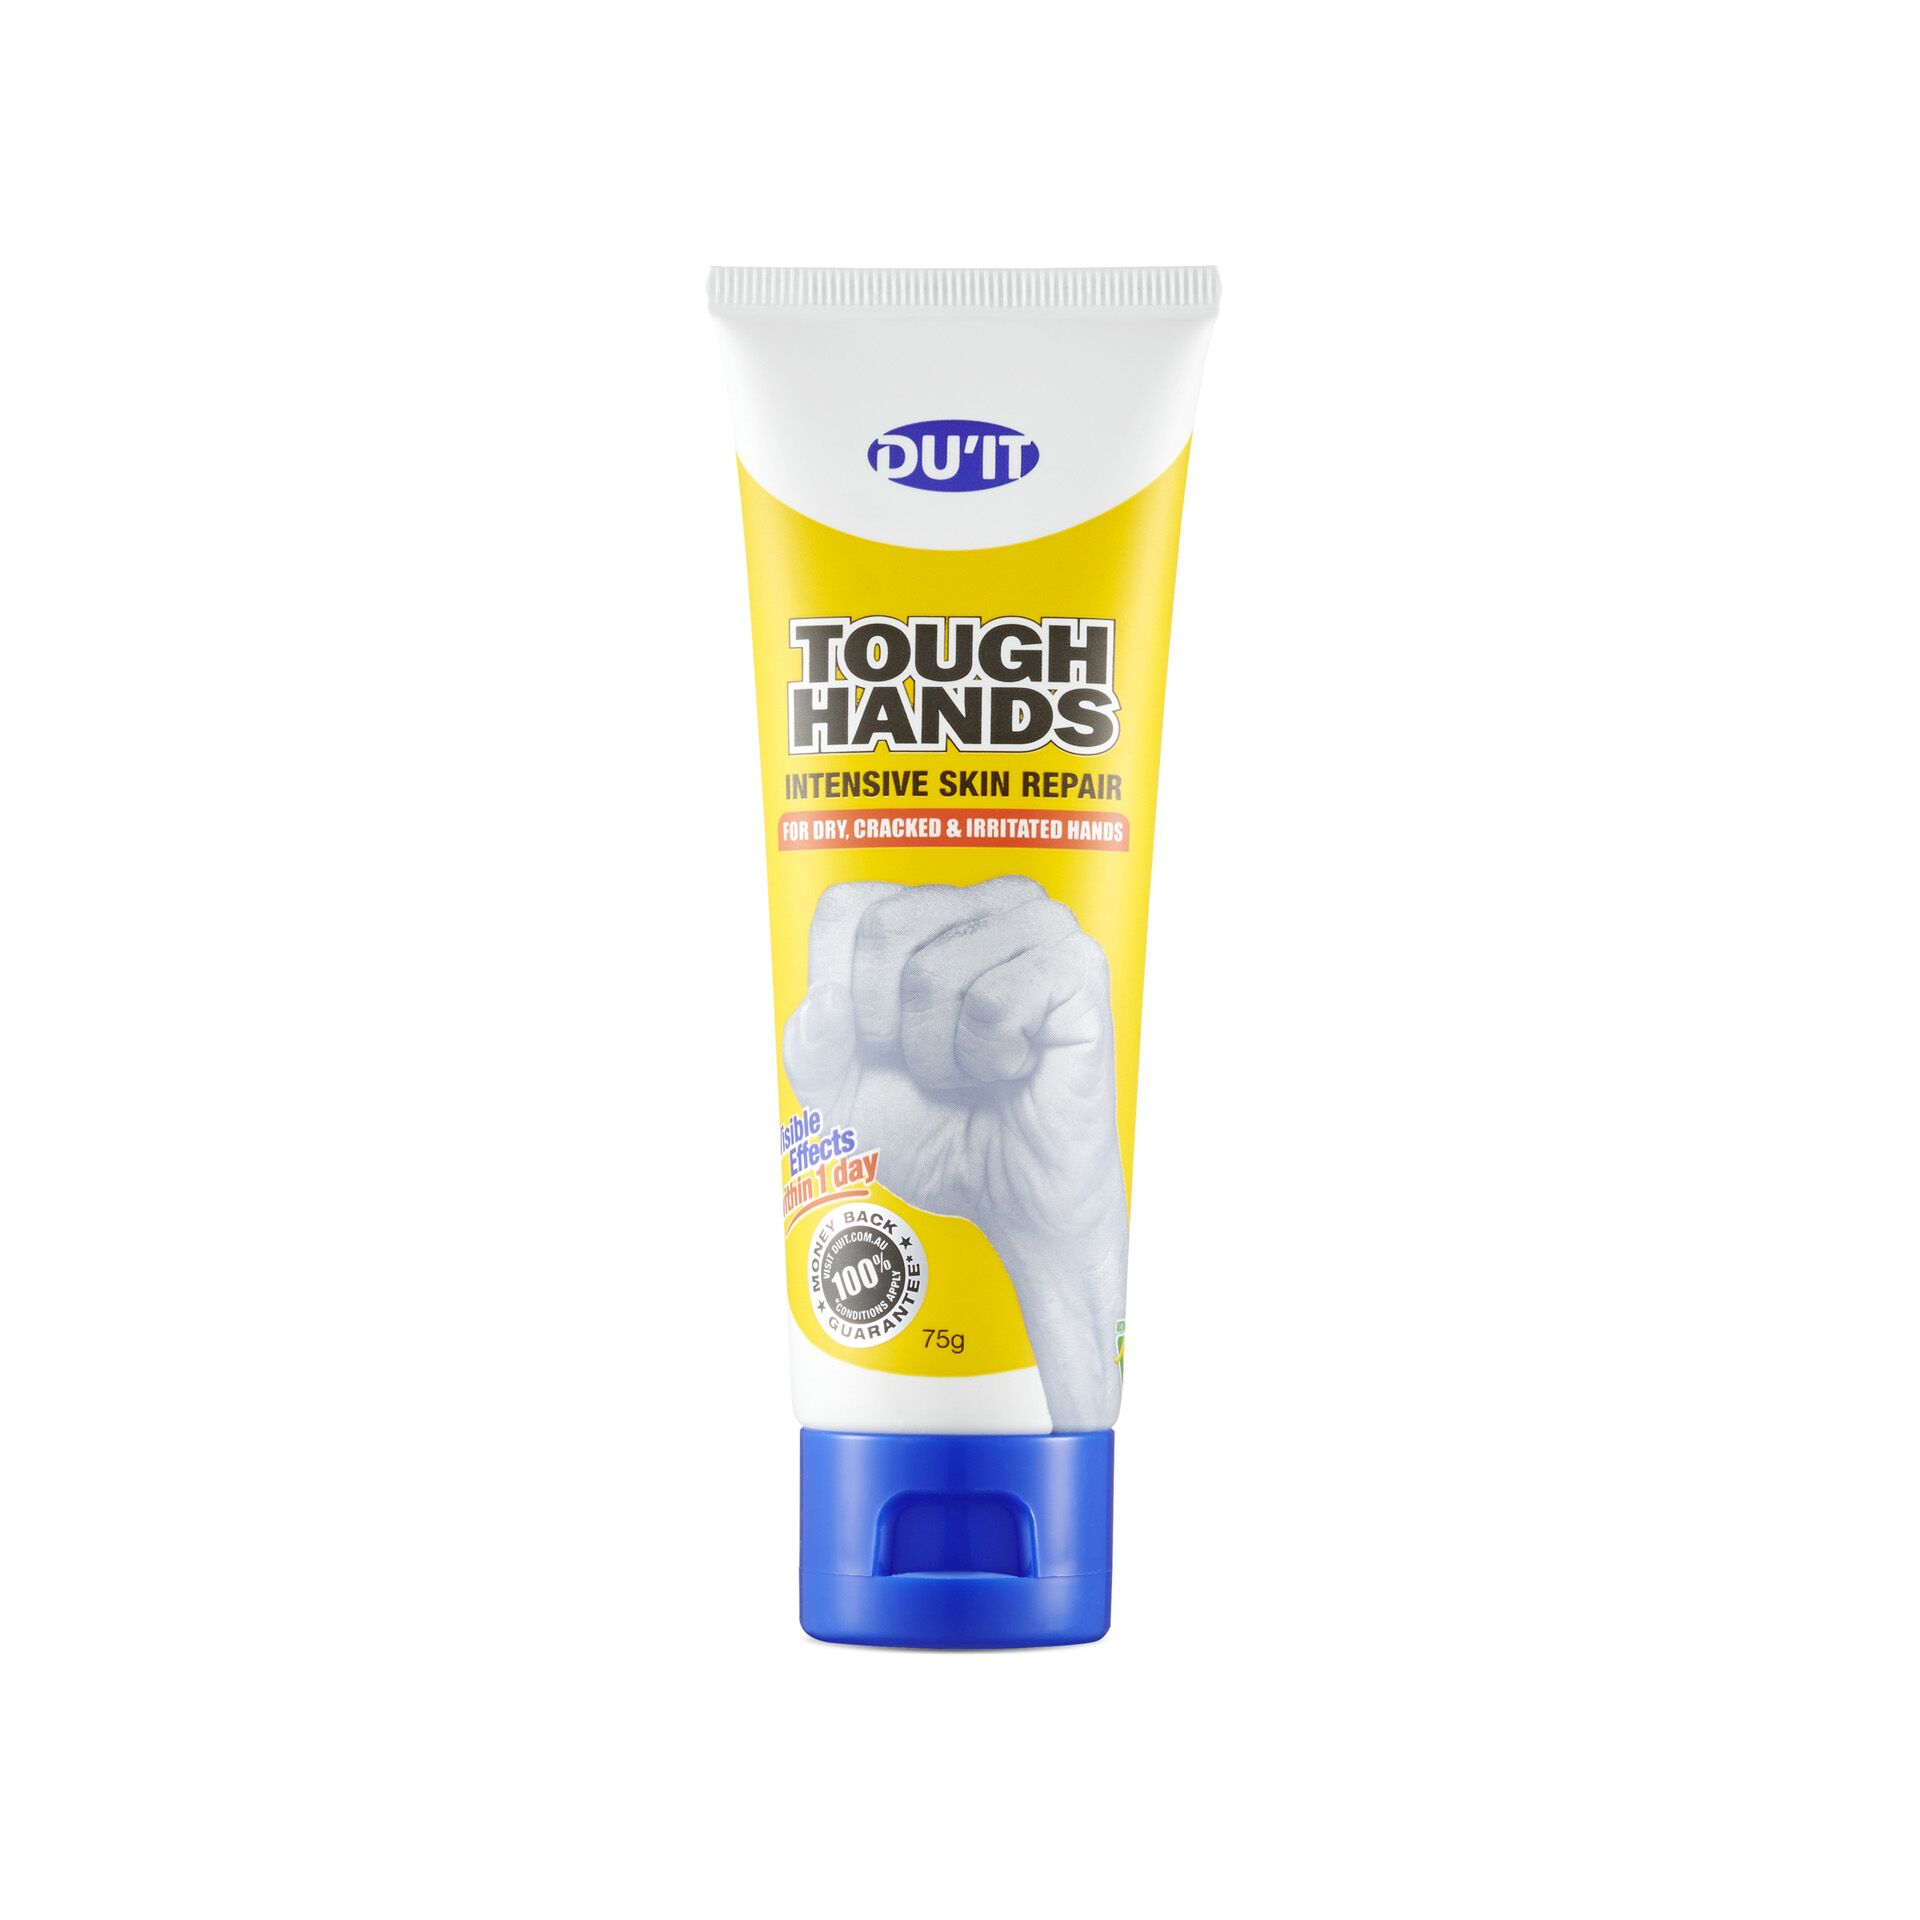 Tough Hands protect your hands from sun exposure, excessive washing, chemical irritants and more.